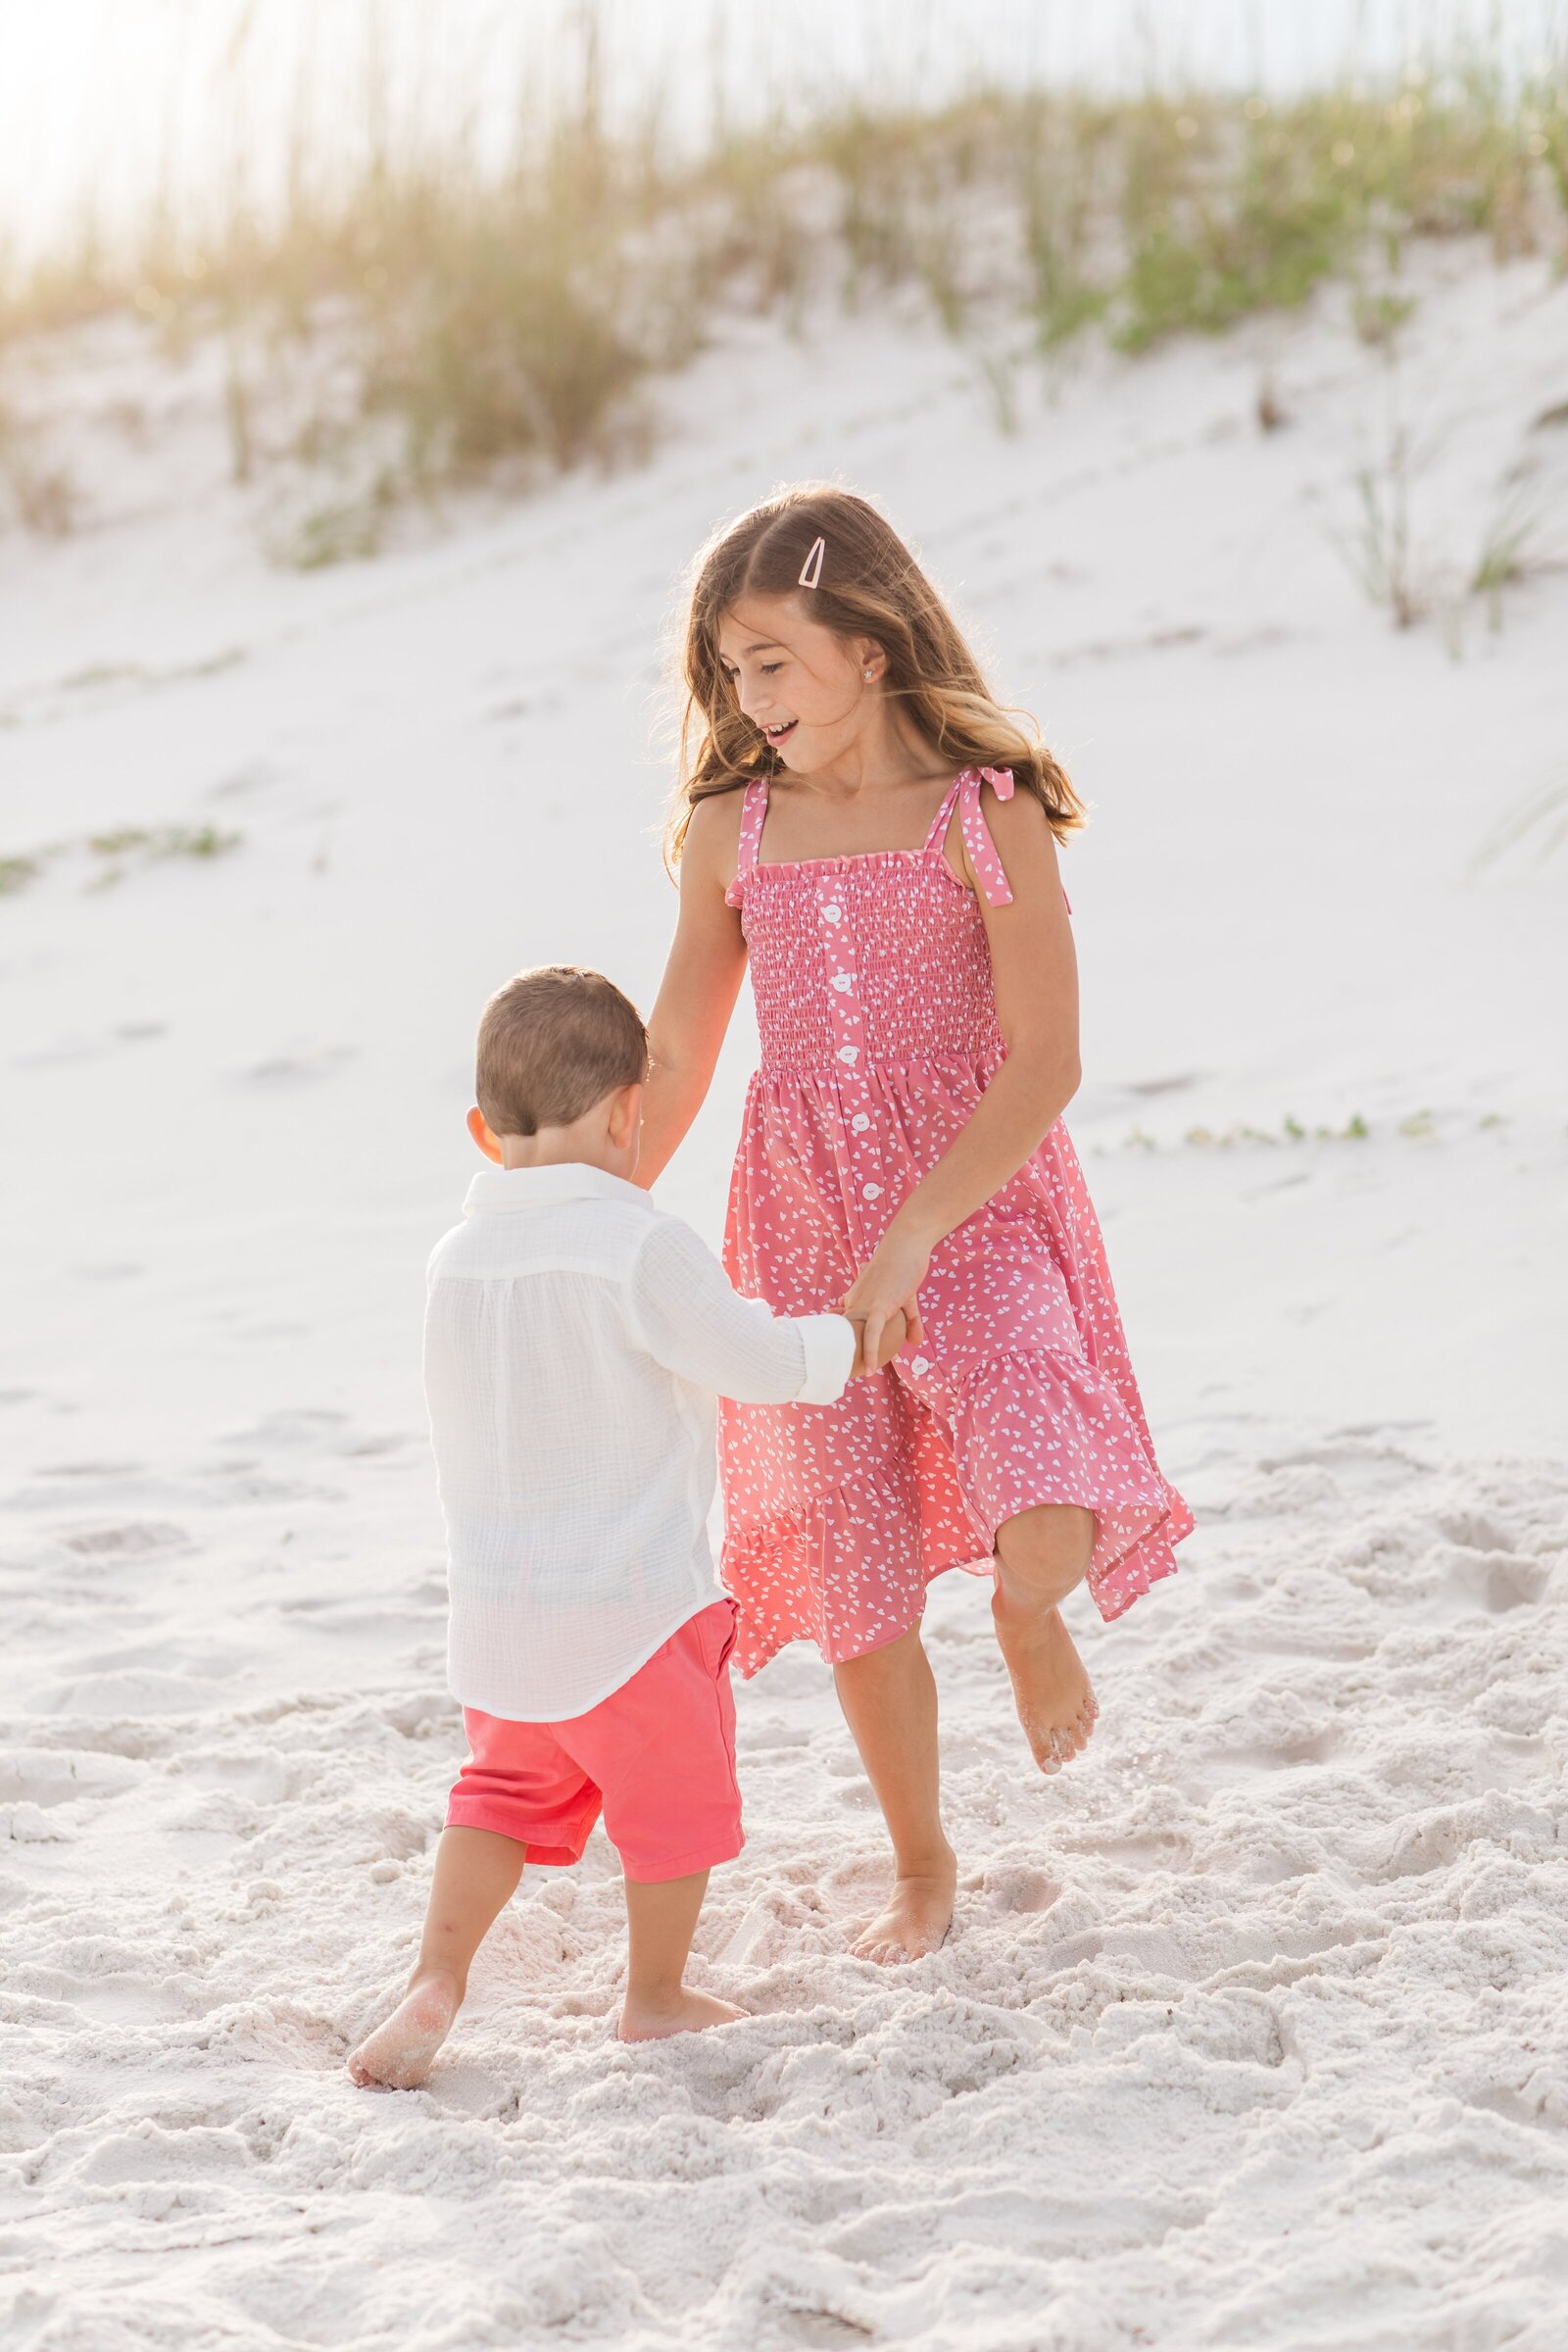 Pensacola Beach vacation family photo session .  Brother and sister playing ring around the rosy in the sand.